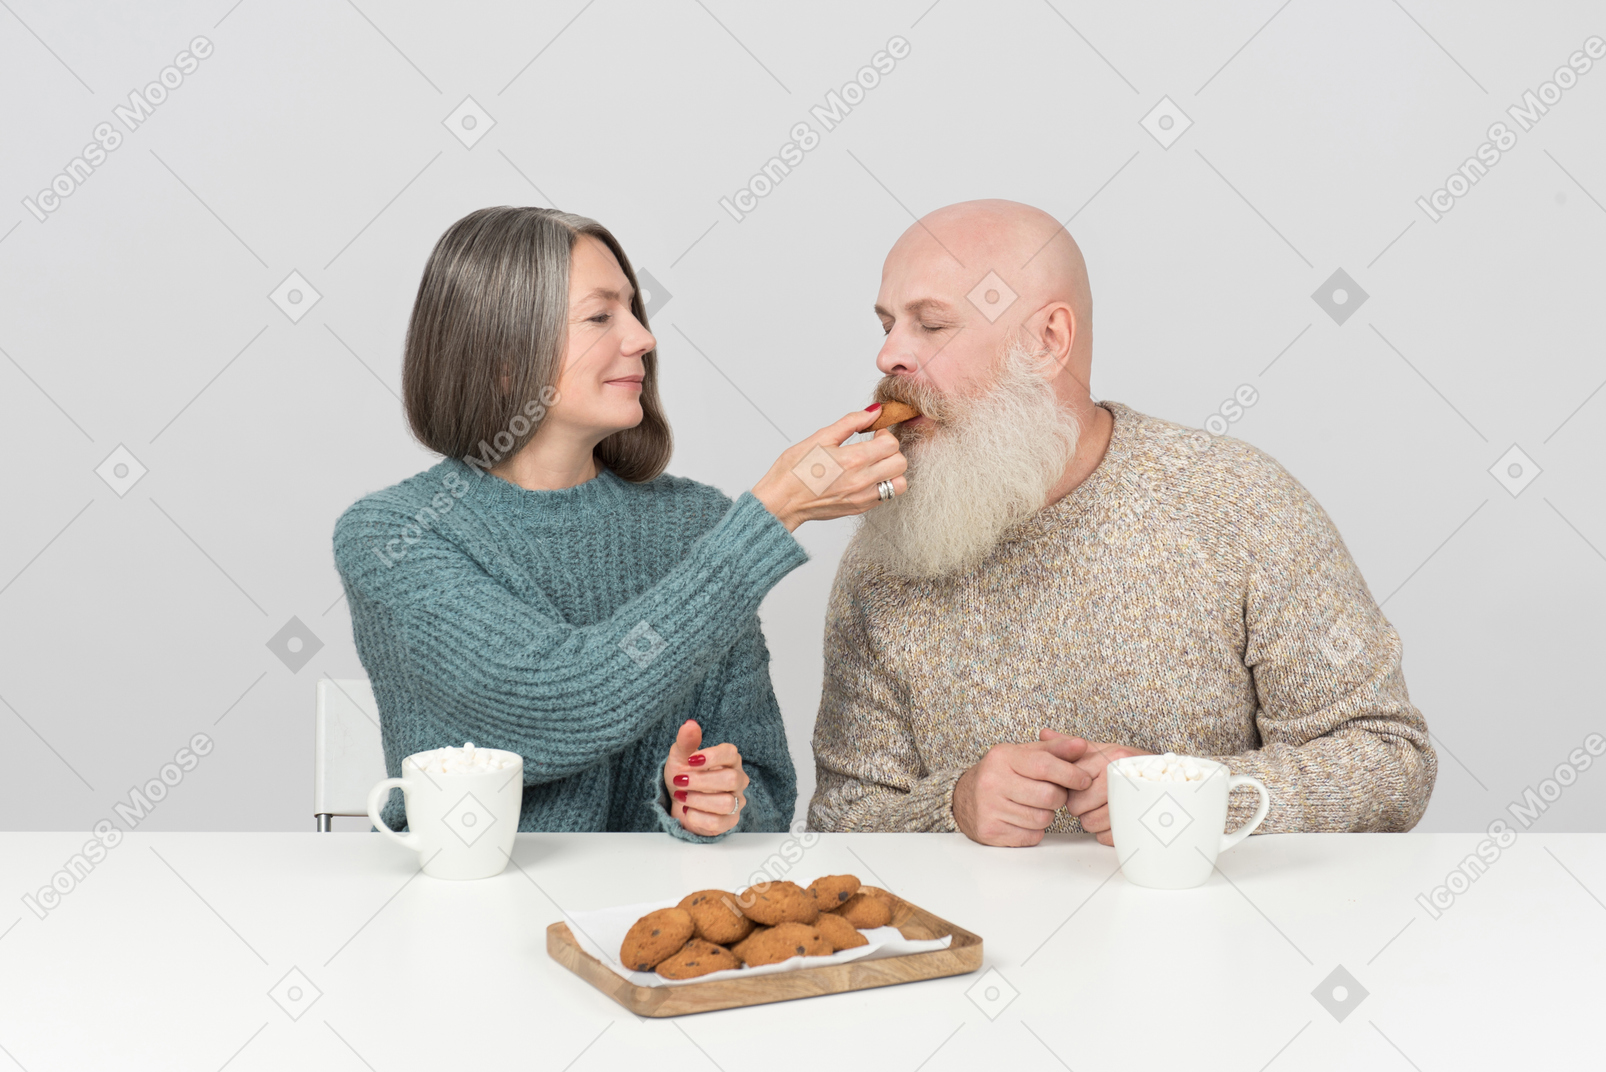 Aged man eating cookie from his wife's hands